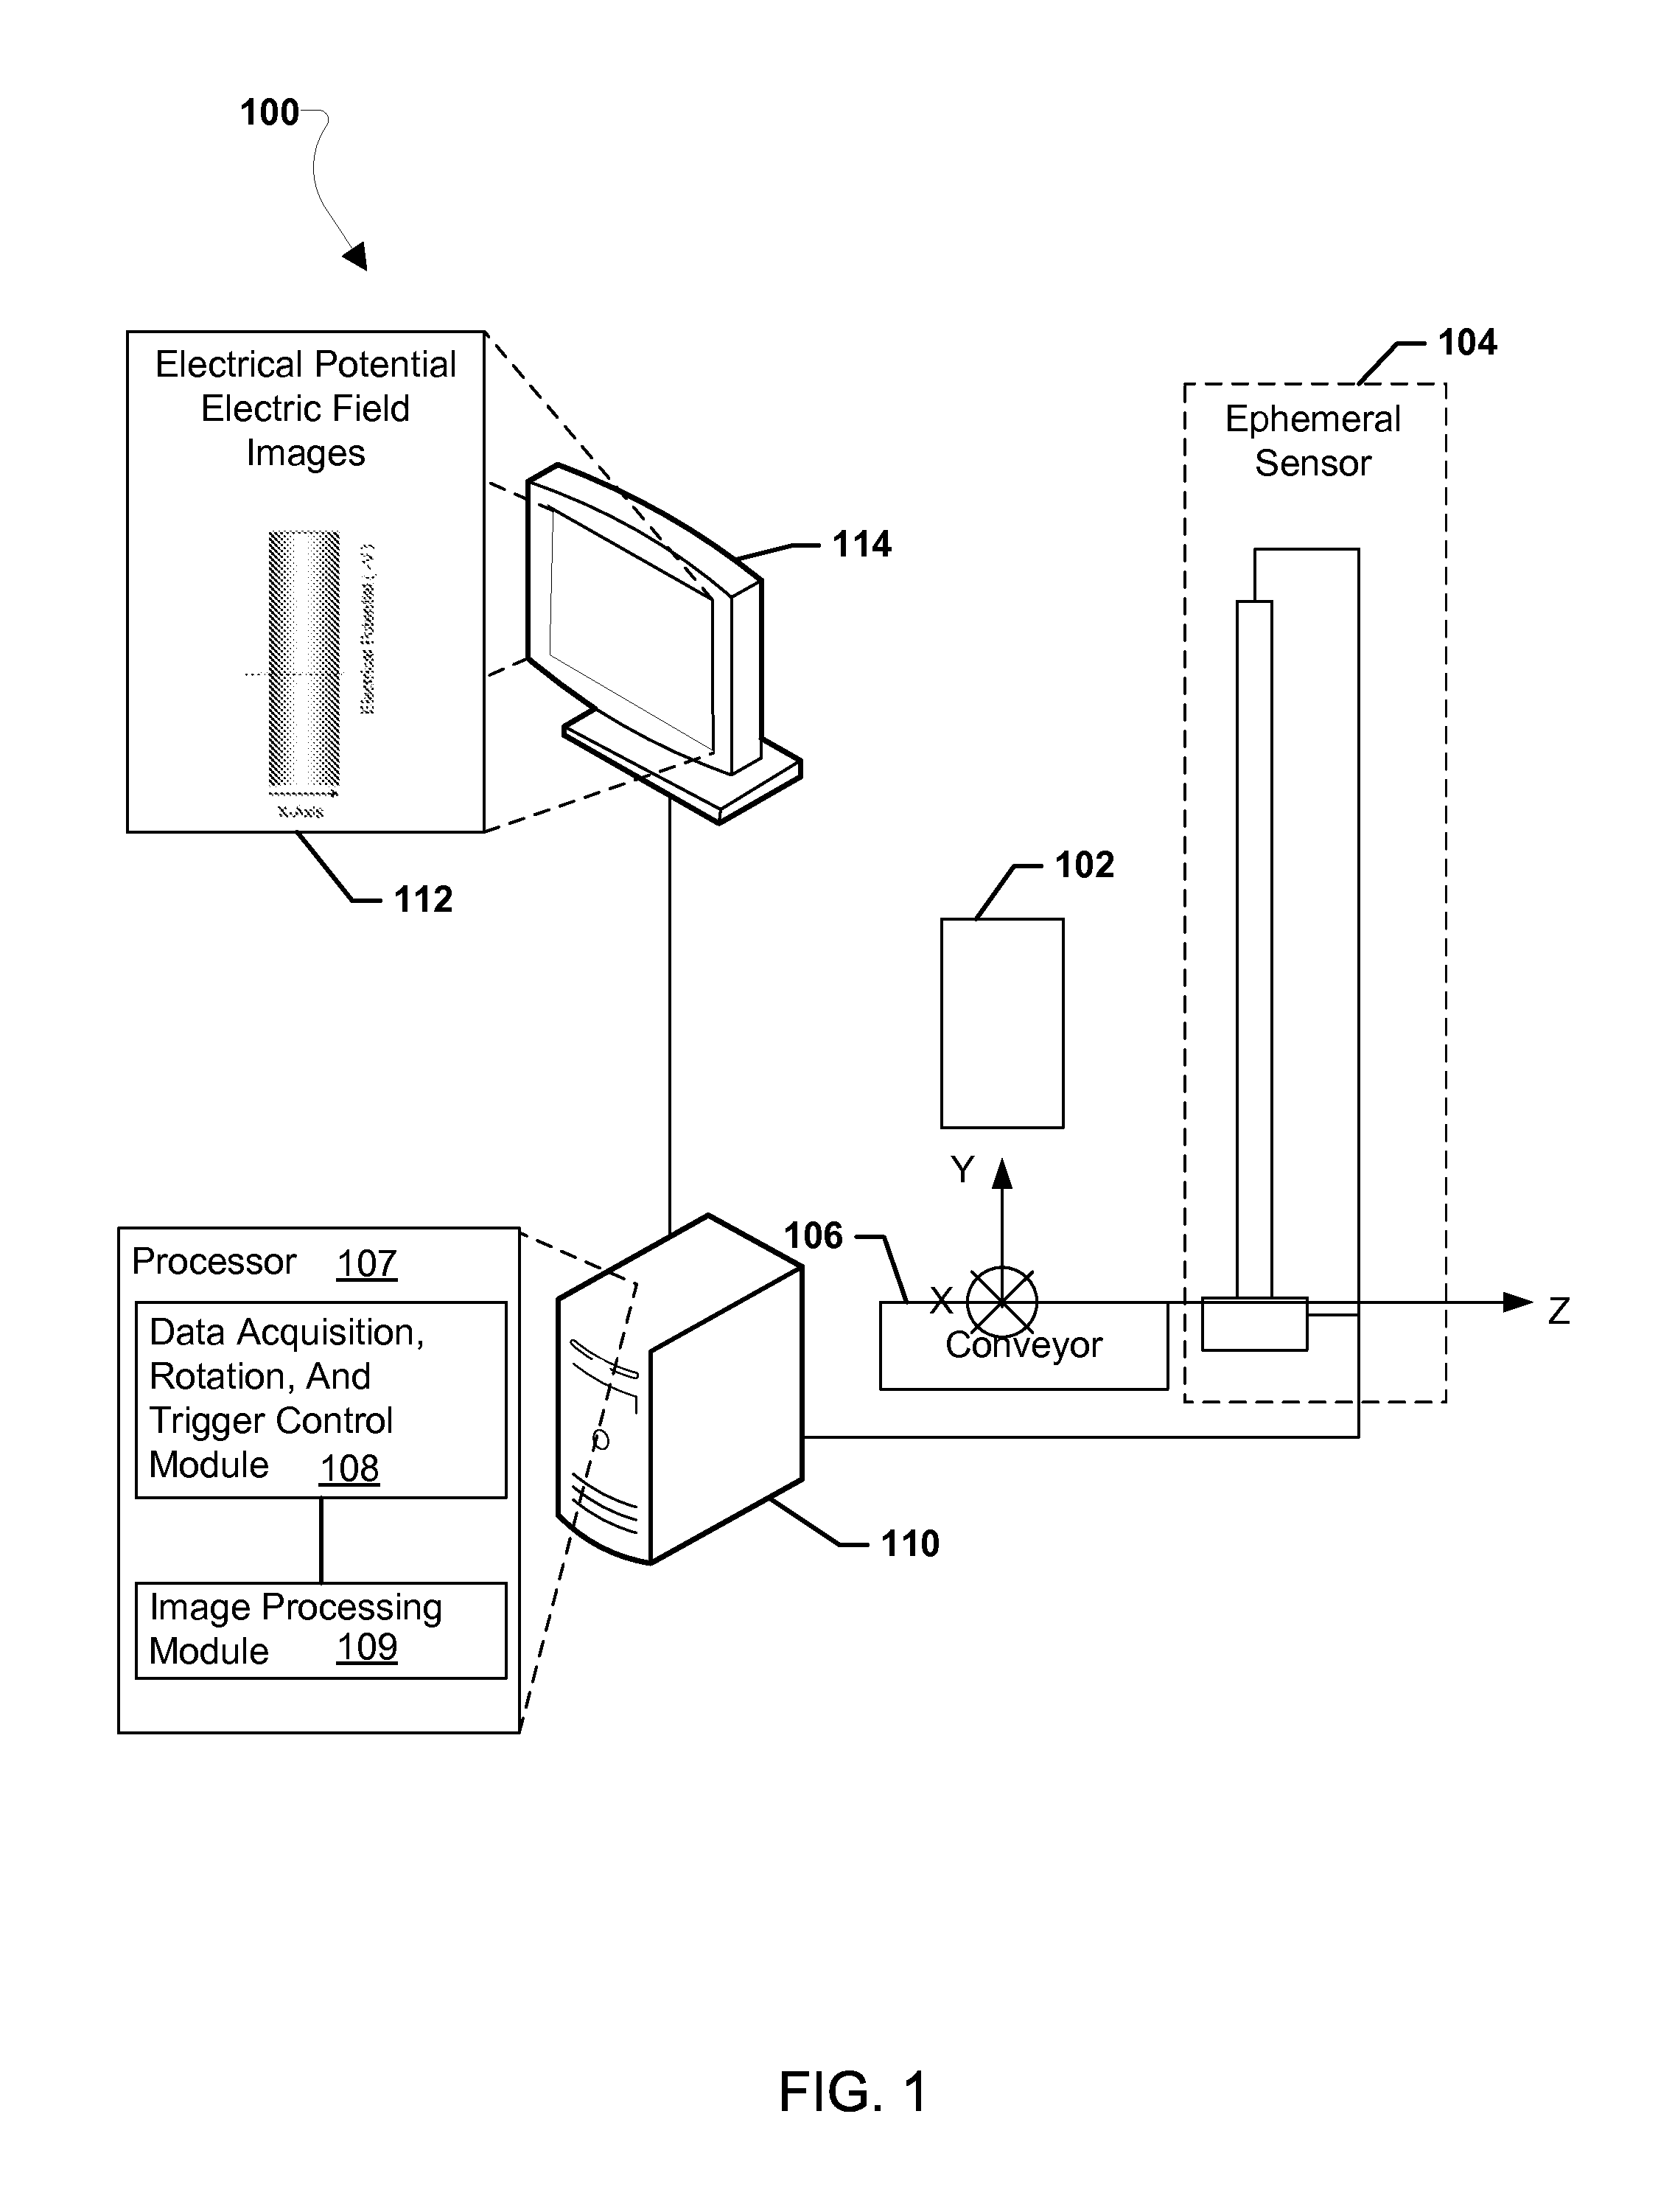 Ephemeral Electric Potential and Electric Field Sensor